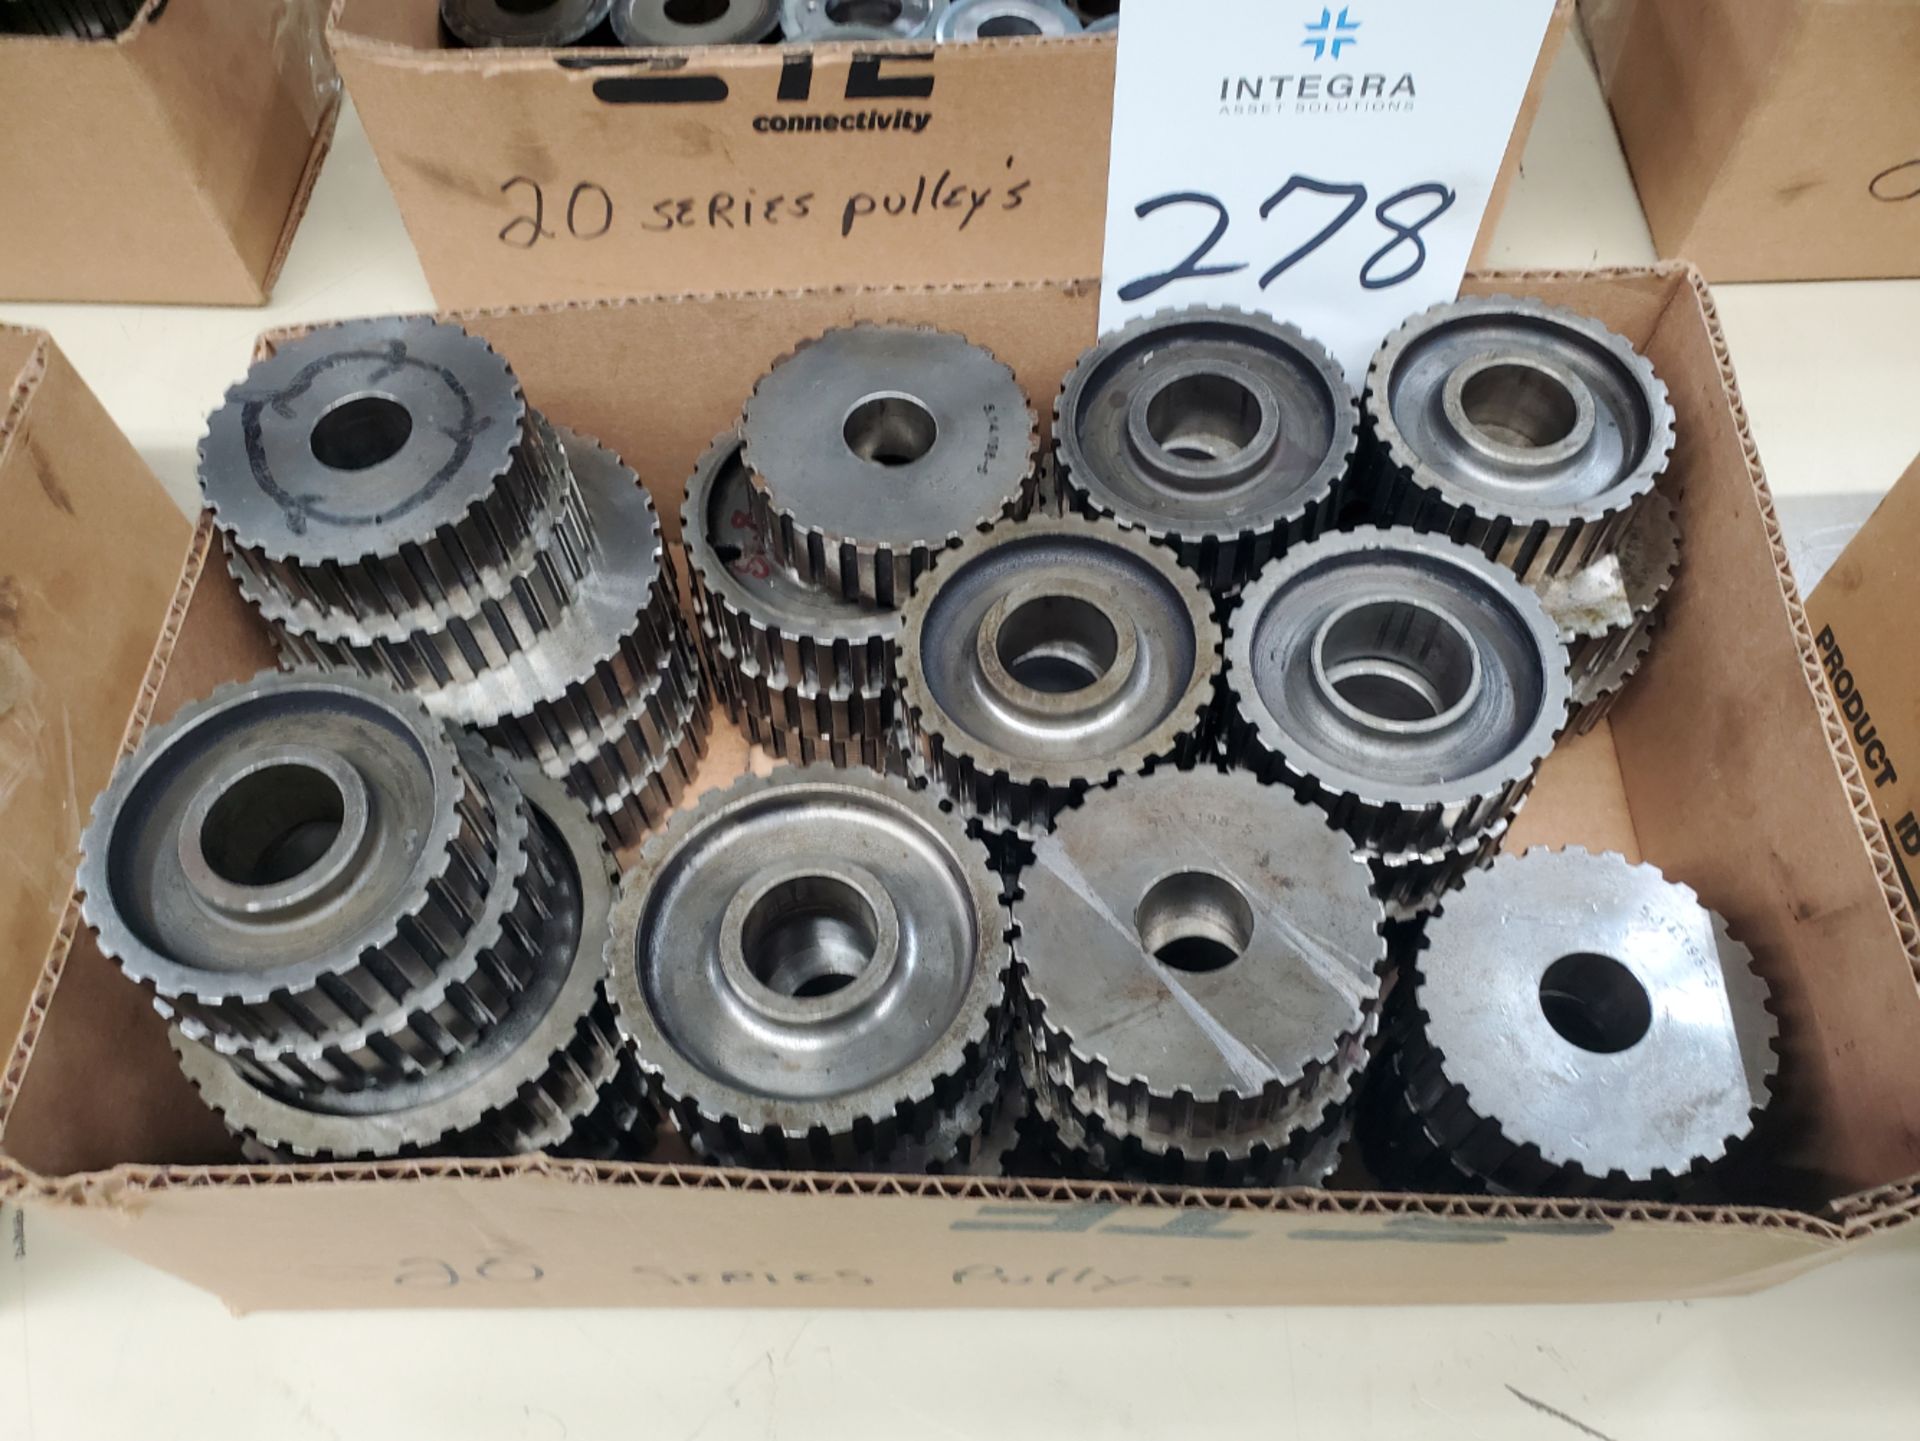 Lot Assorted Series 20 Drive Pulleys